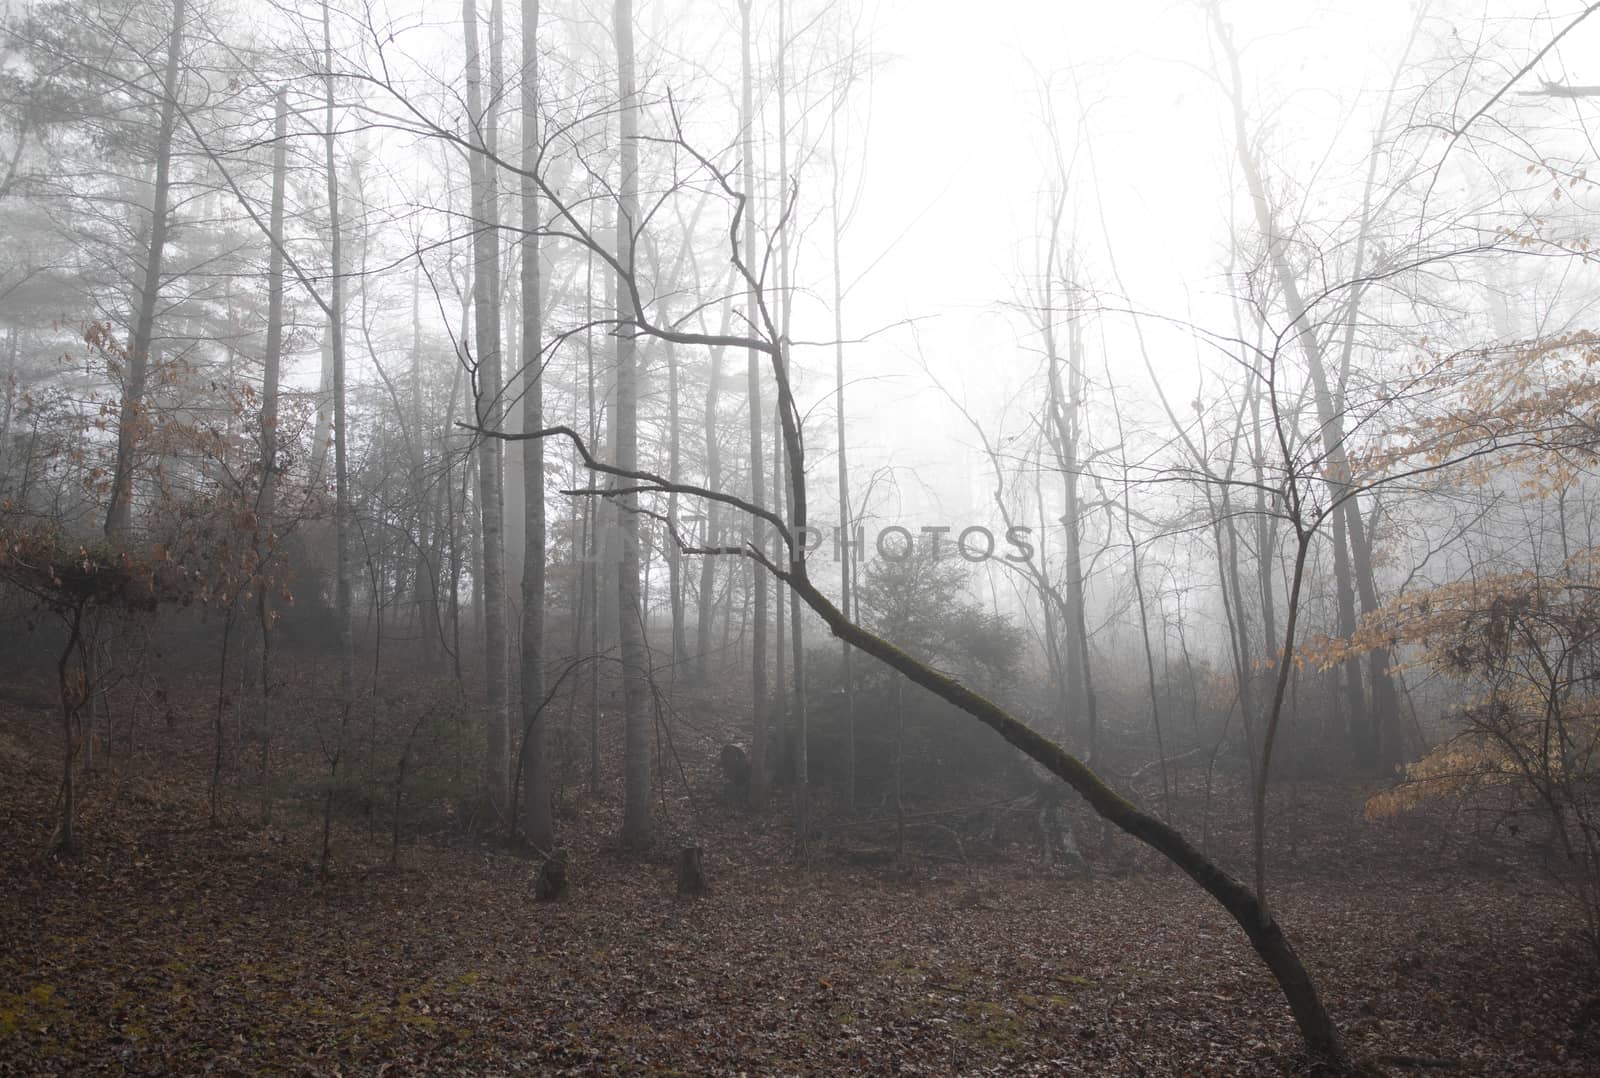 Woodland clearing on a foggy winter morning in January. Ground is covered in fallen leaves and most trees are bare.